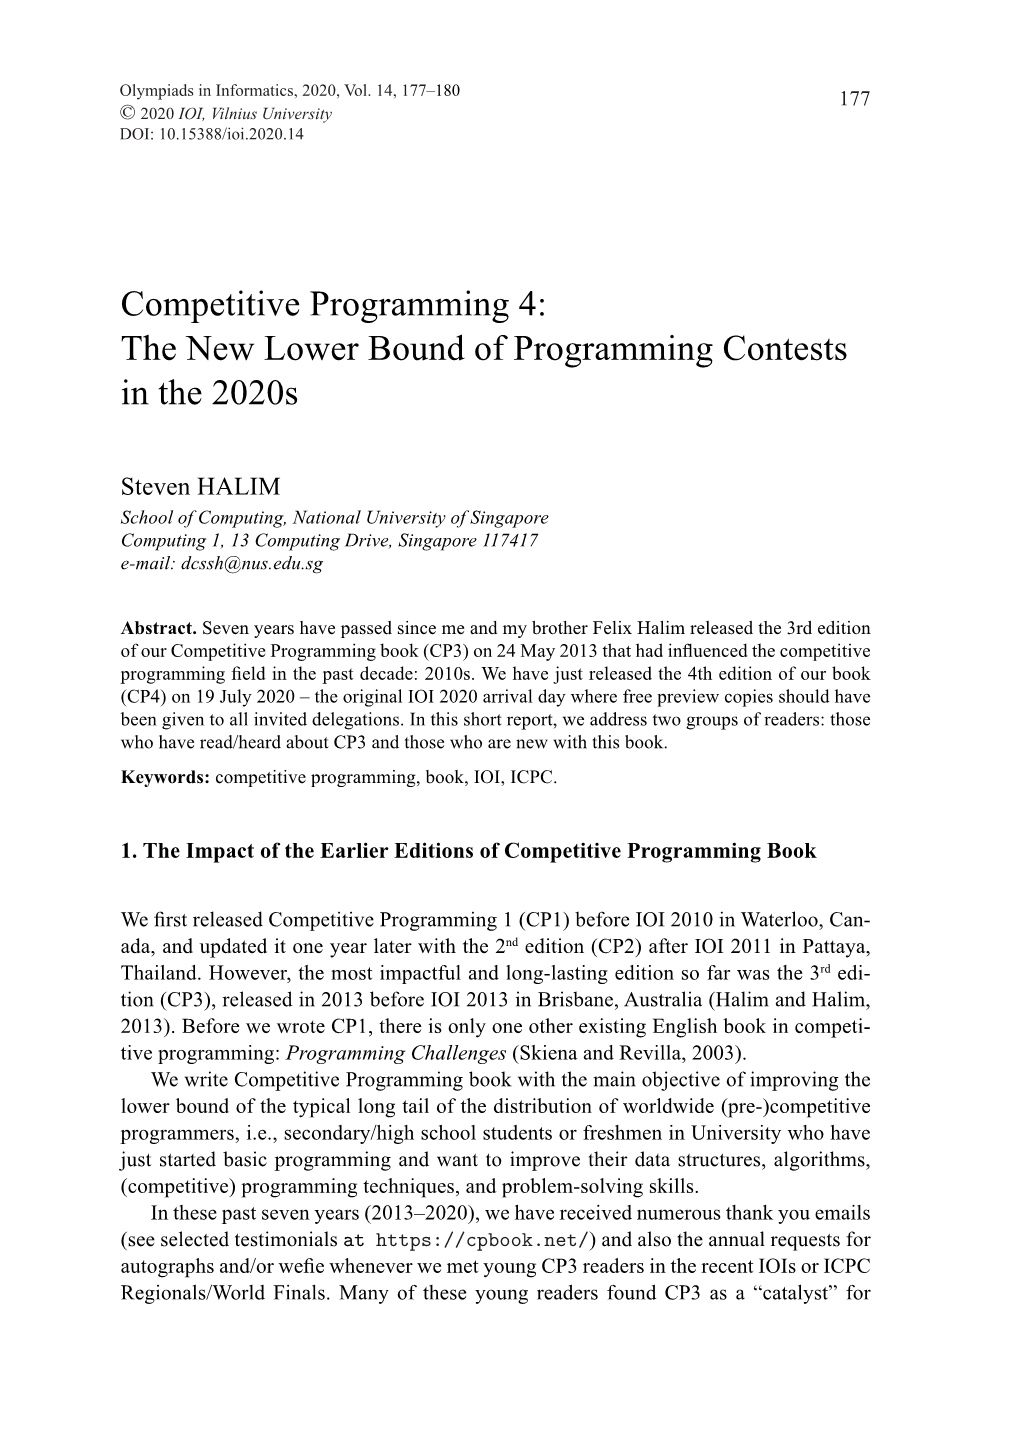 Competitive Programming 4: the New Lower Bound of Programming Contests in the 2020S